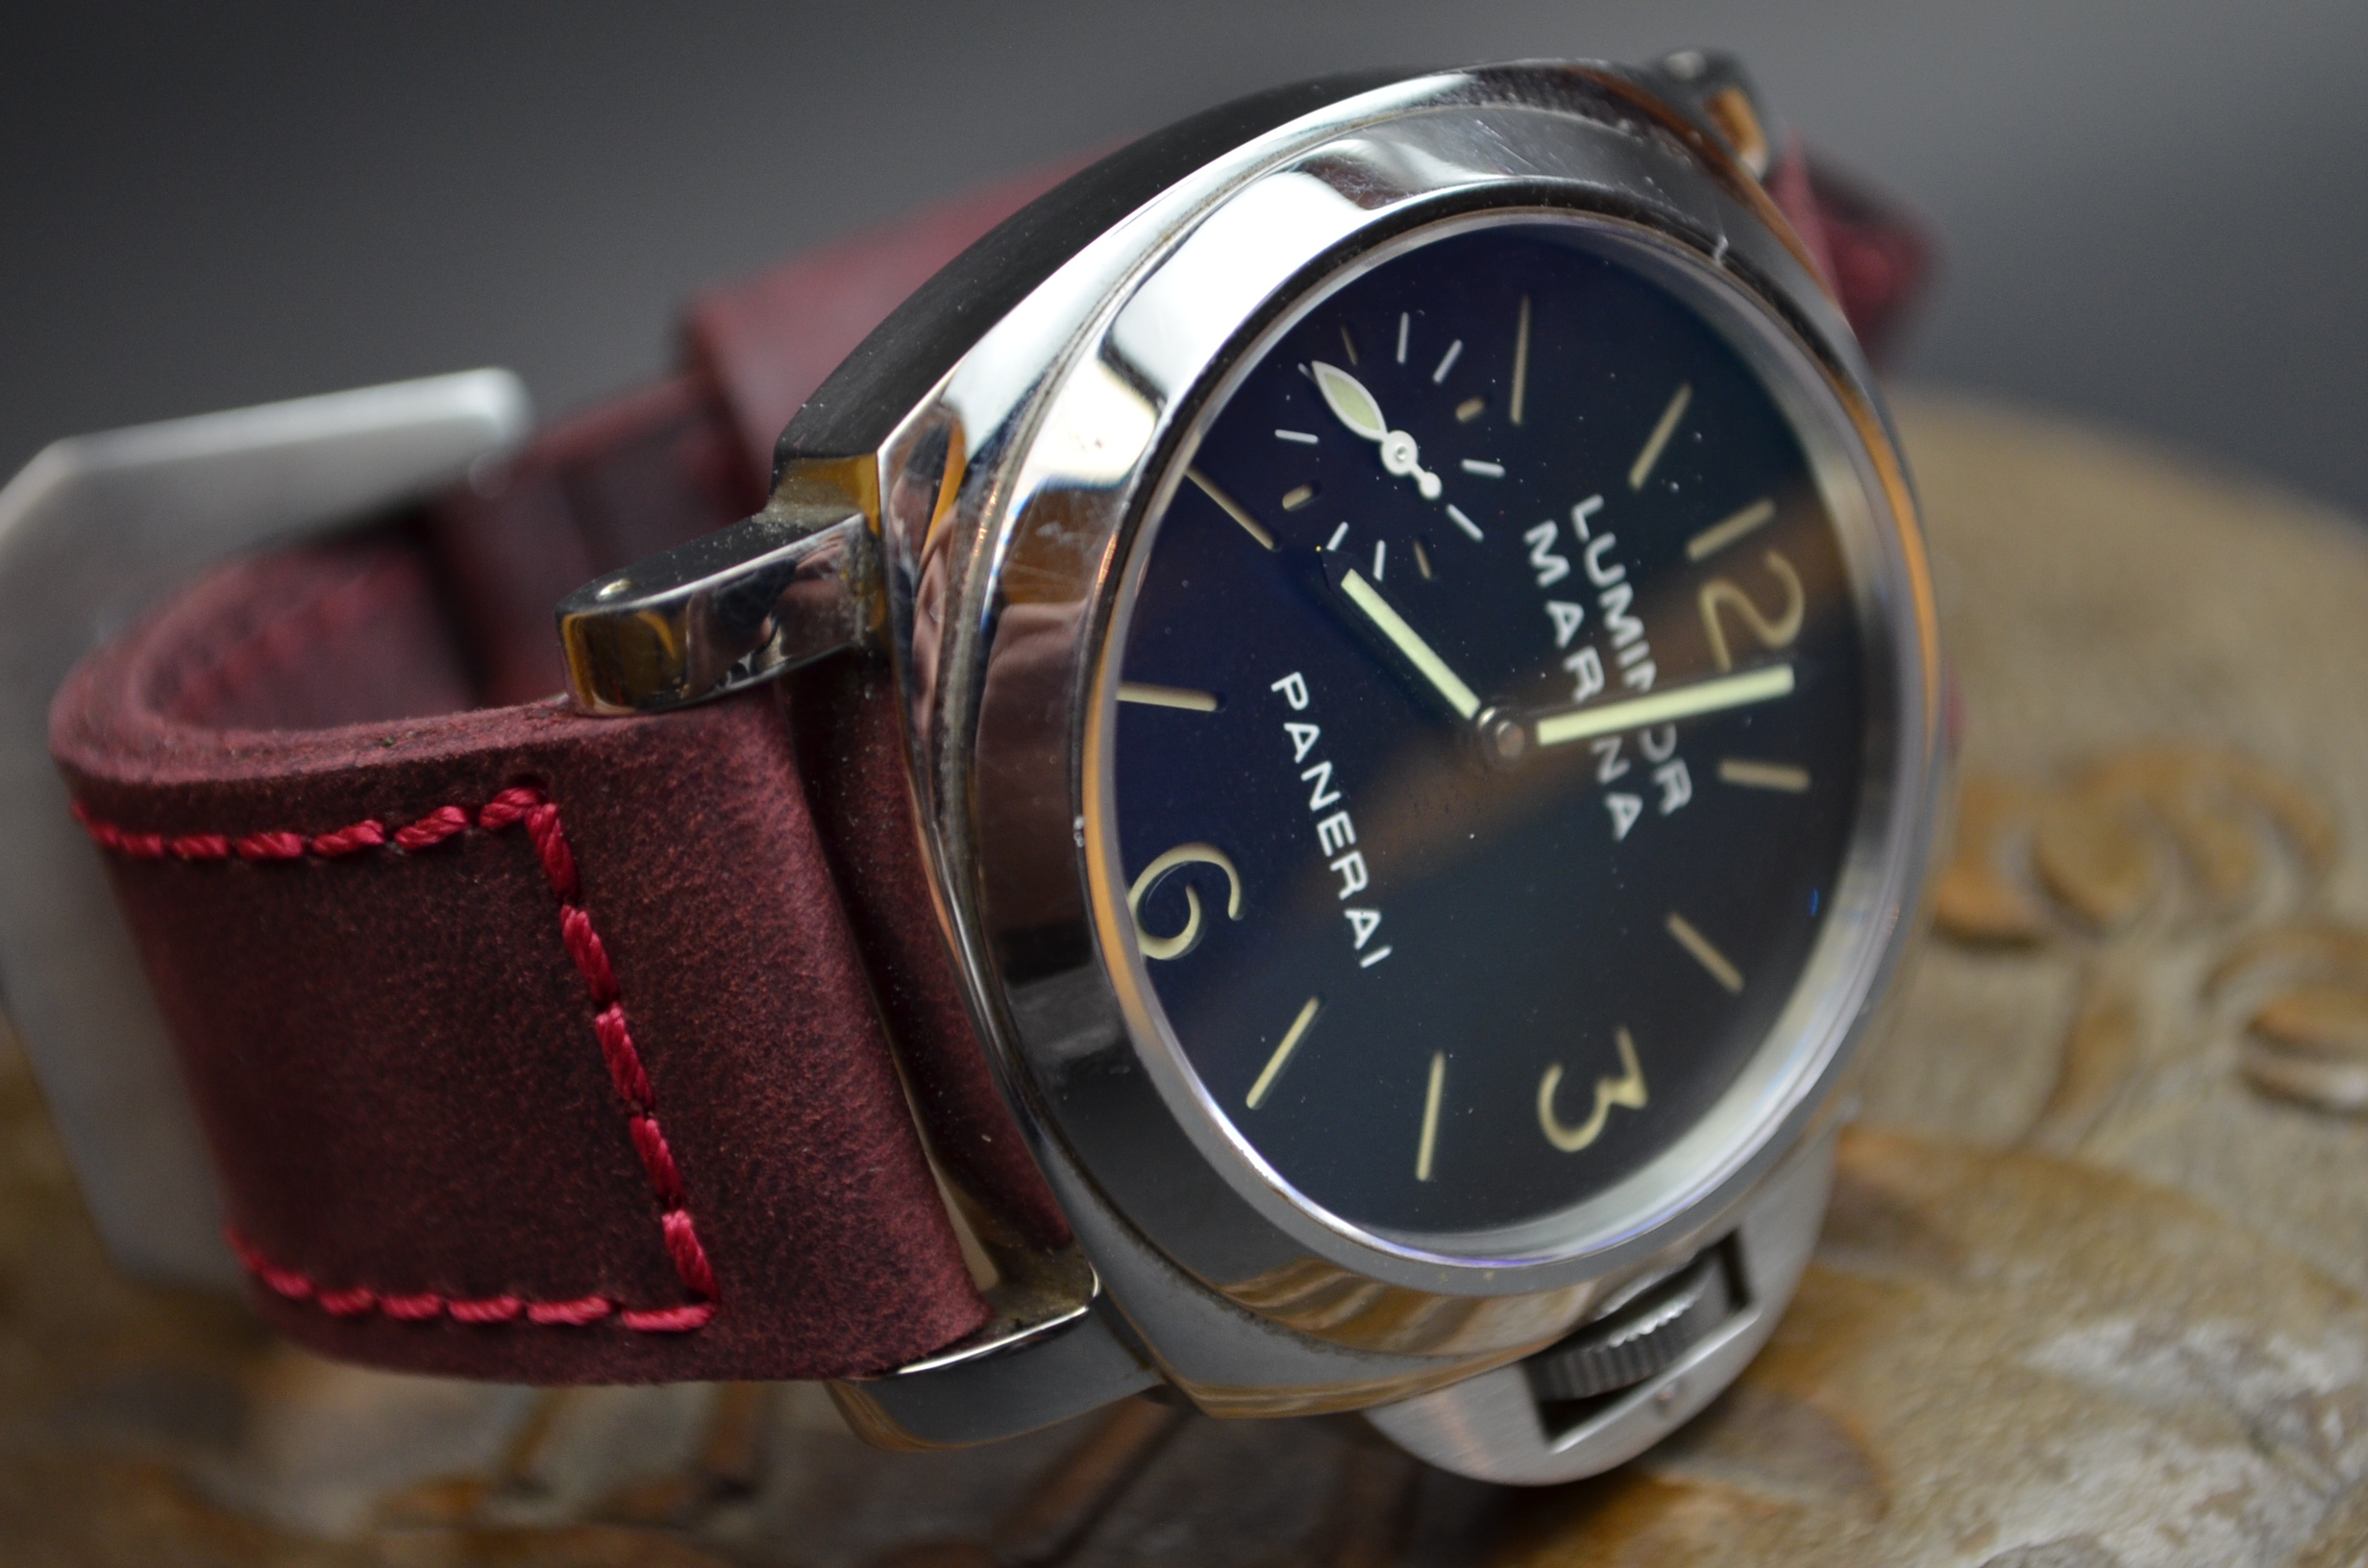 BURGUNDY I is one of our hand crafted watch straps. Available in burgundy color, 4 - 4.5 mm thick.